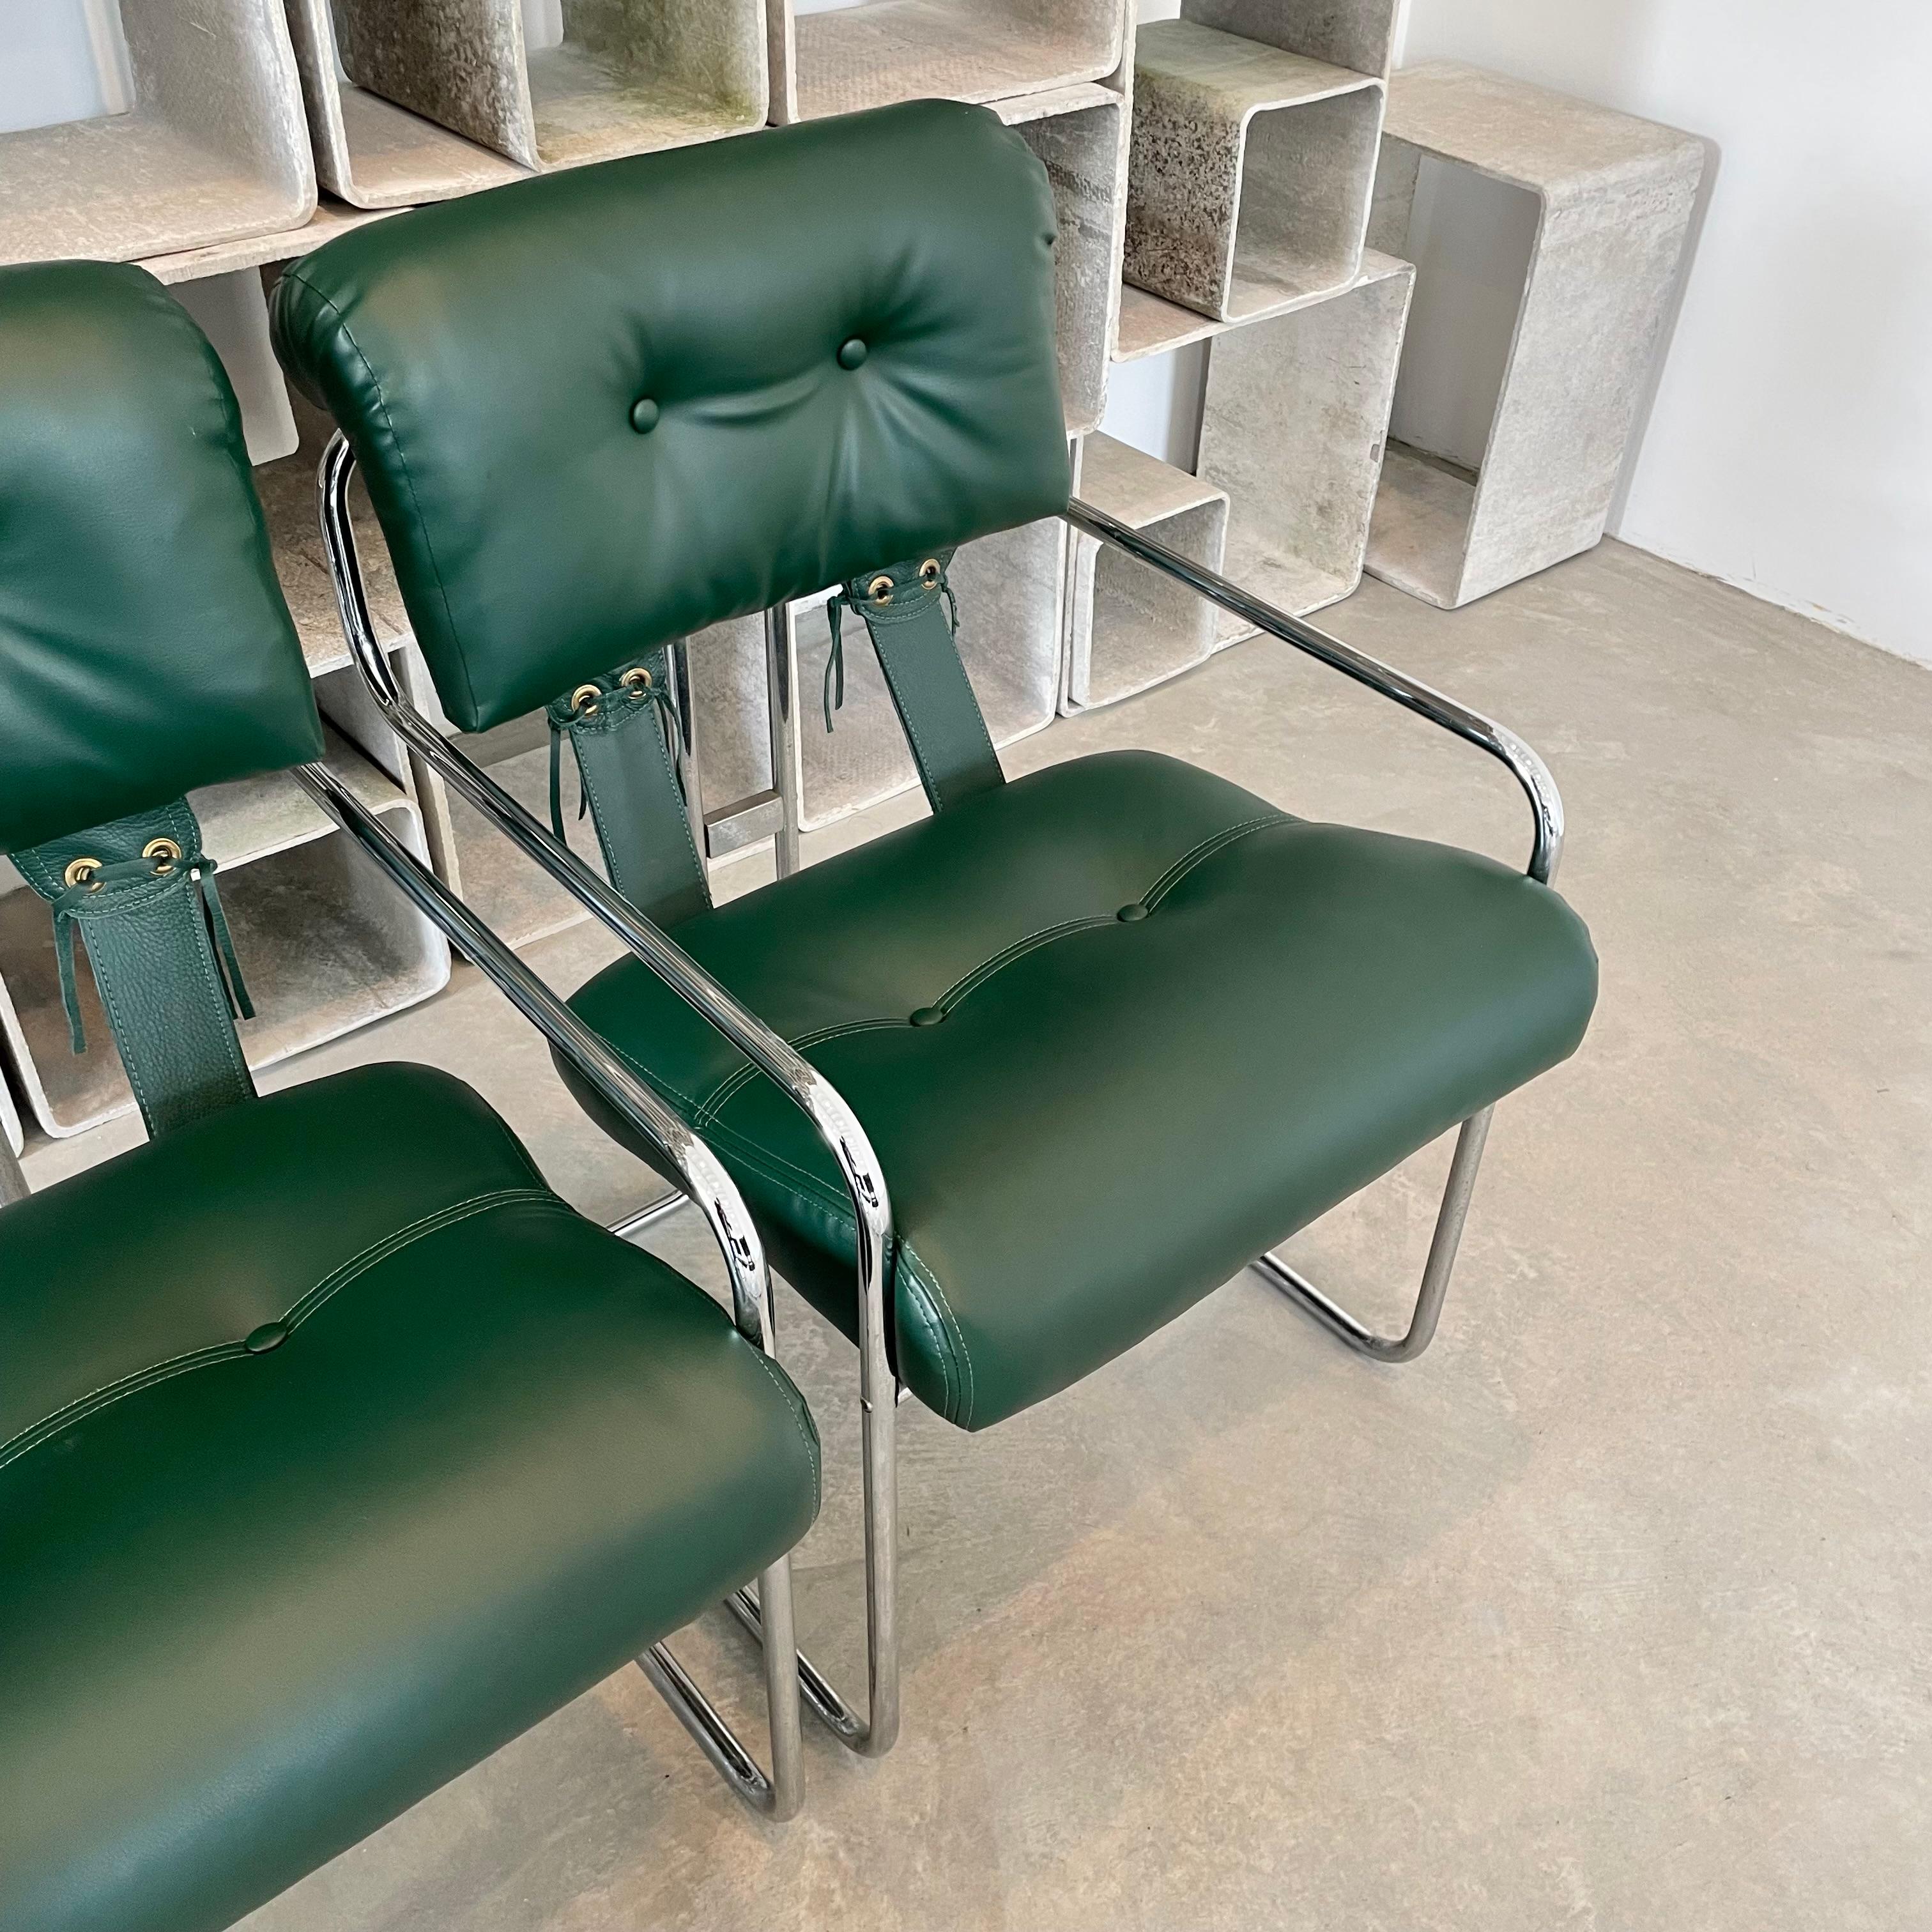 Set of 7 'Tucroma' Chairs in Green by Guido Faleschini, 1970s Italy 2